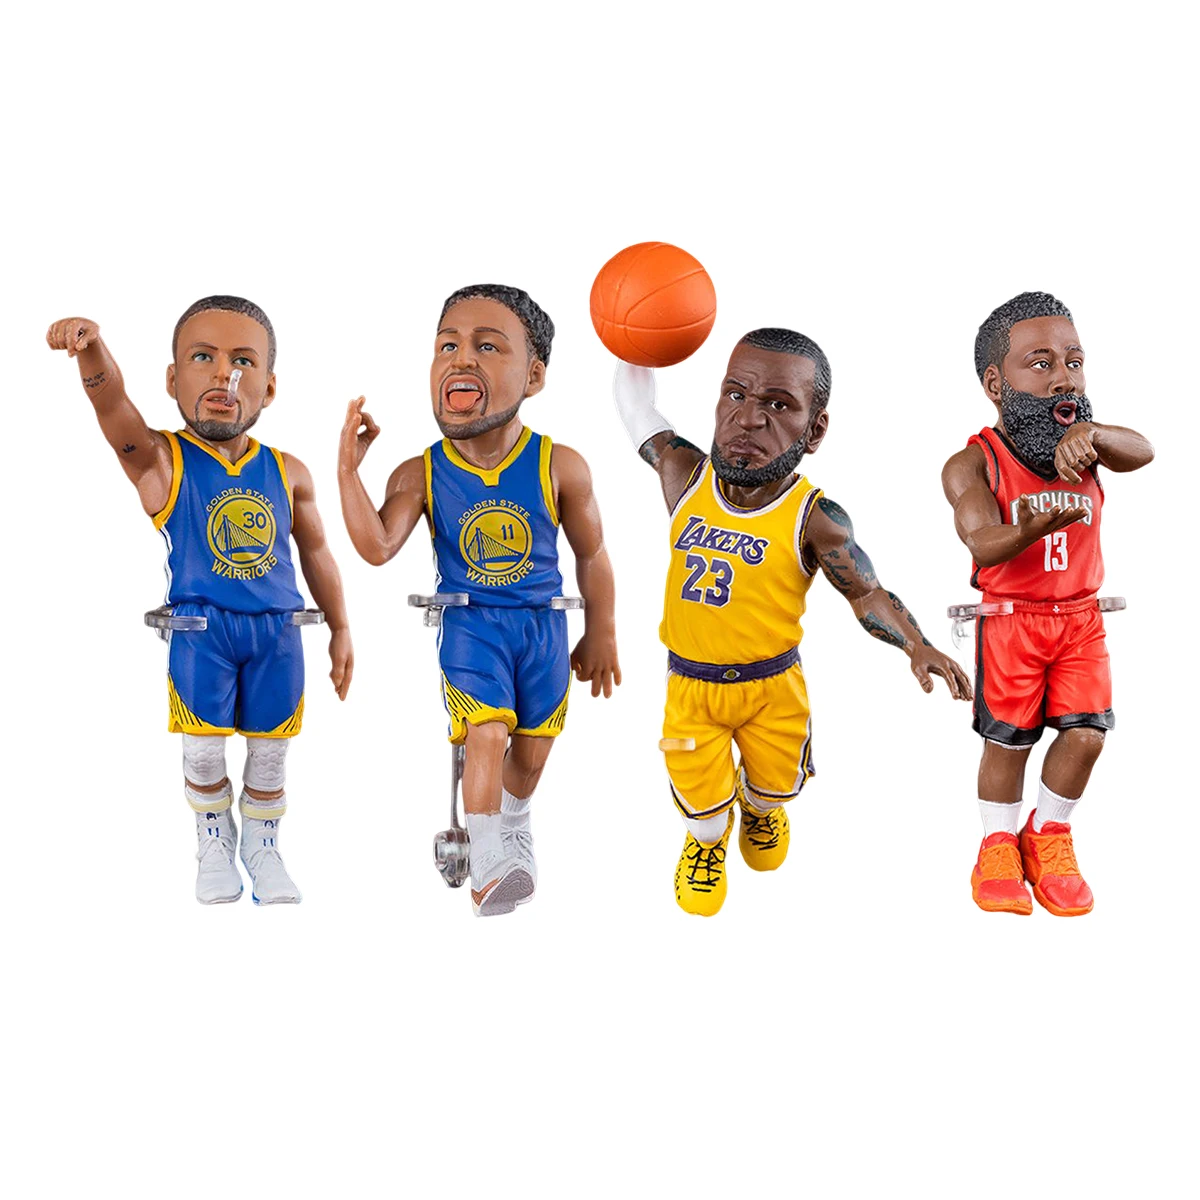 NBA Basketball Star Q-Version Action Model Figure Toy Ornament Statue Co... - $29.80